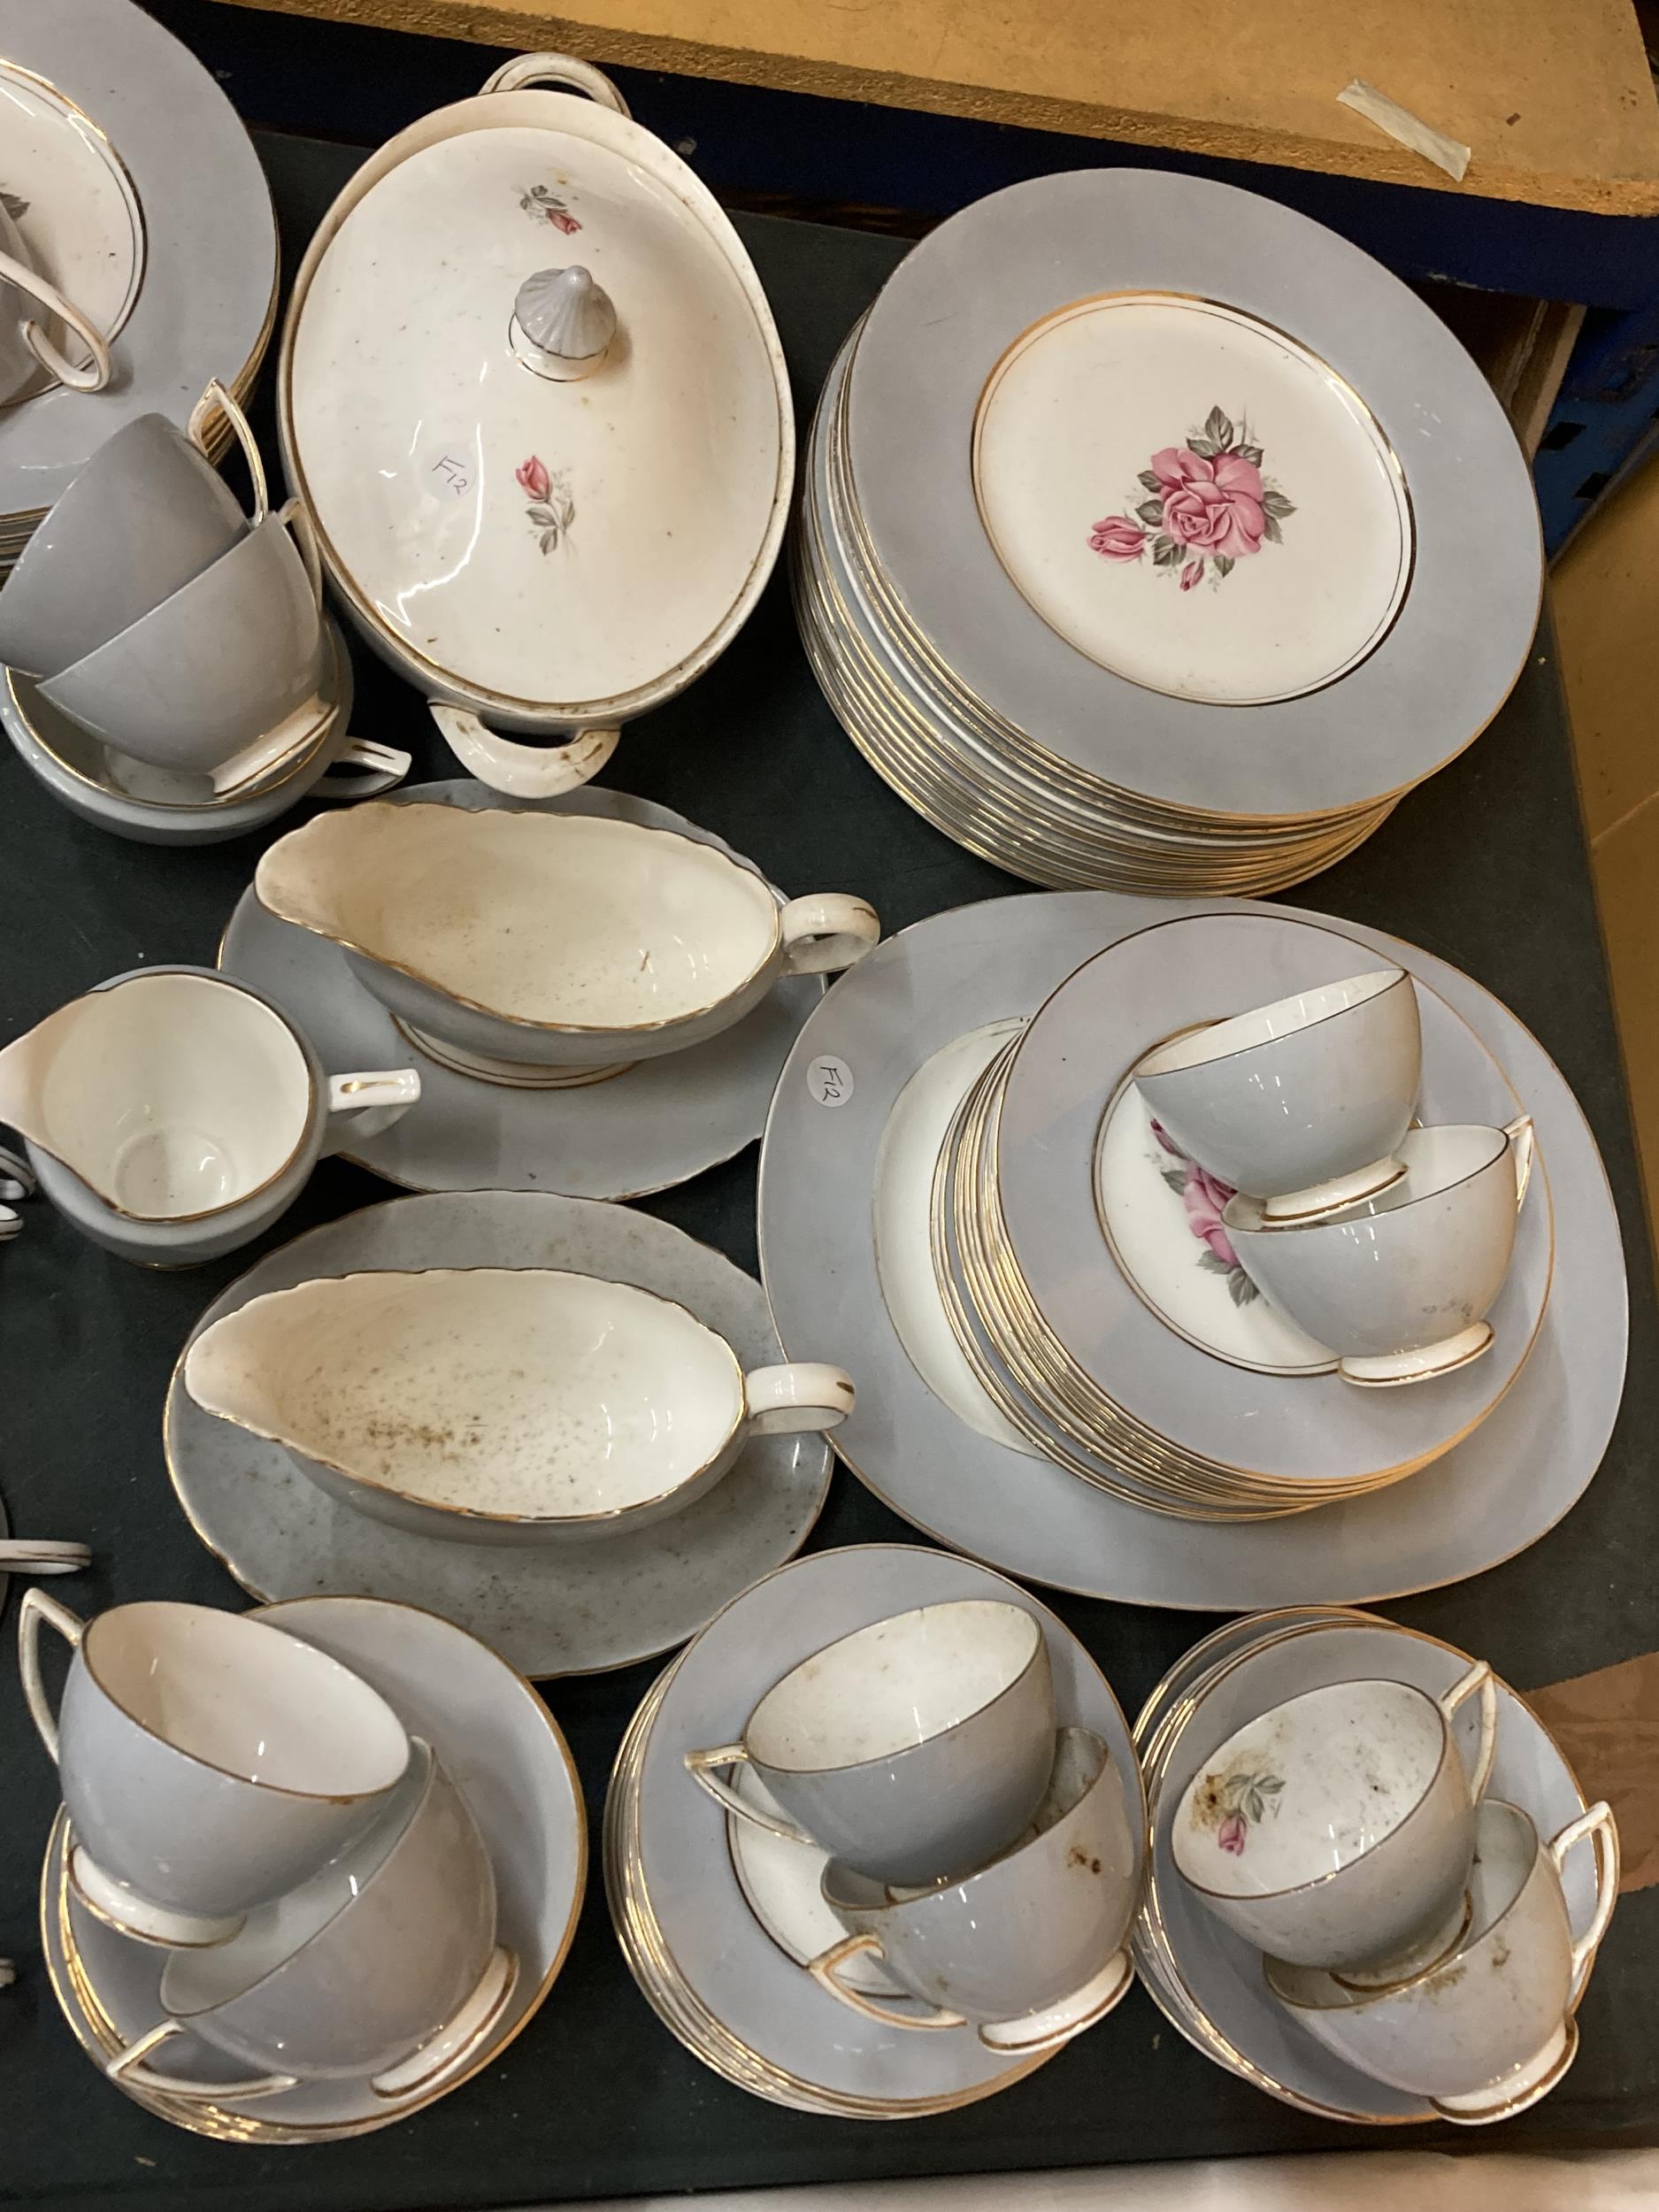 A LARGE QUANTITY OF SHELLEY DINNERWARE IN GREY WITH A PINK ROSE DECORATION TO INCLUDE VARIOUS - Image 3 of 6